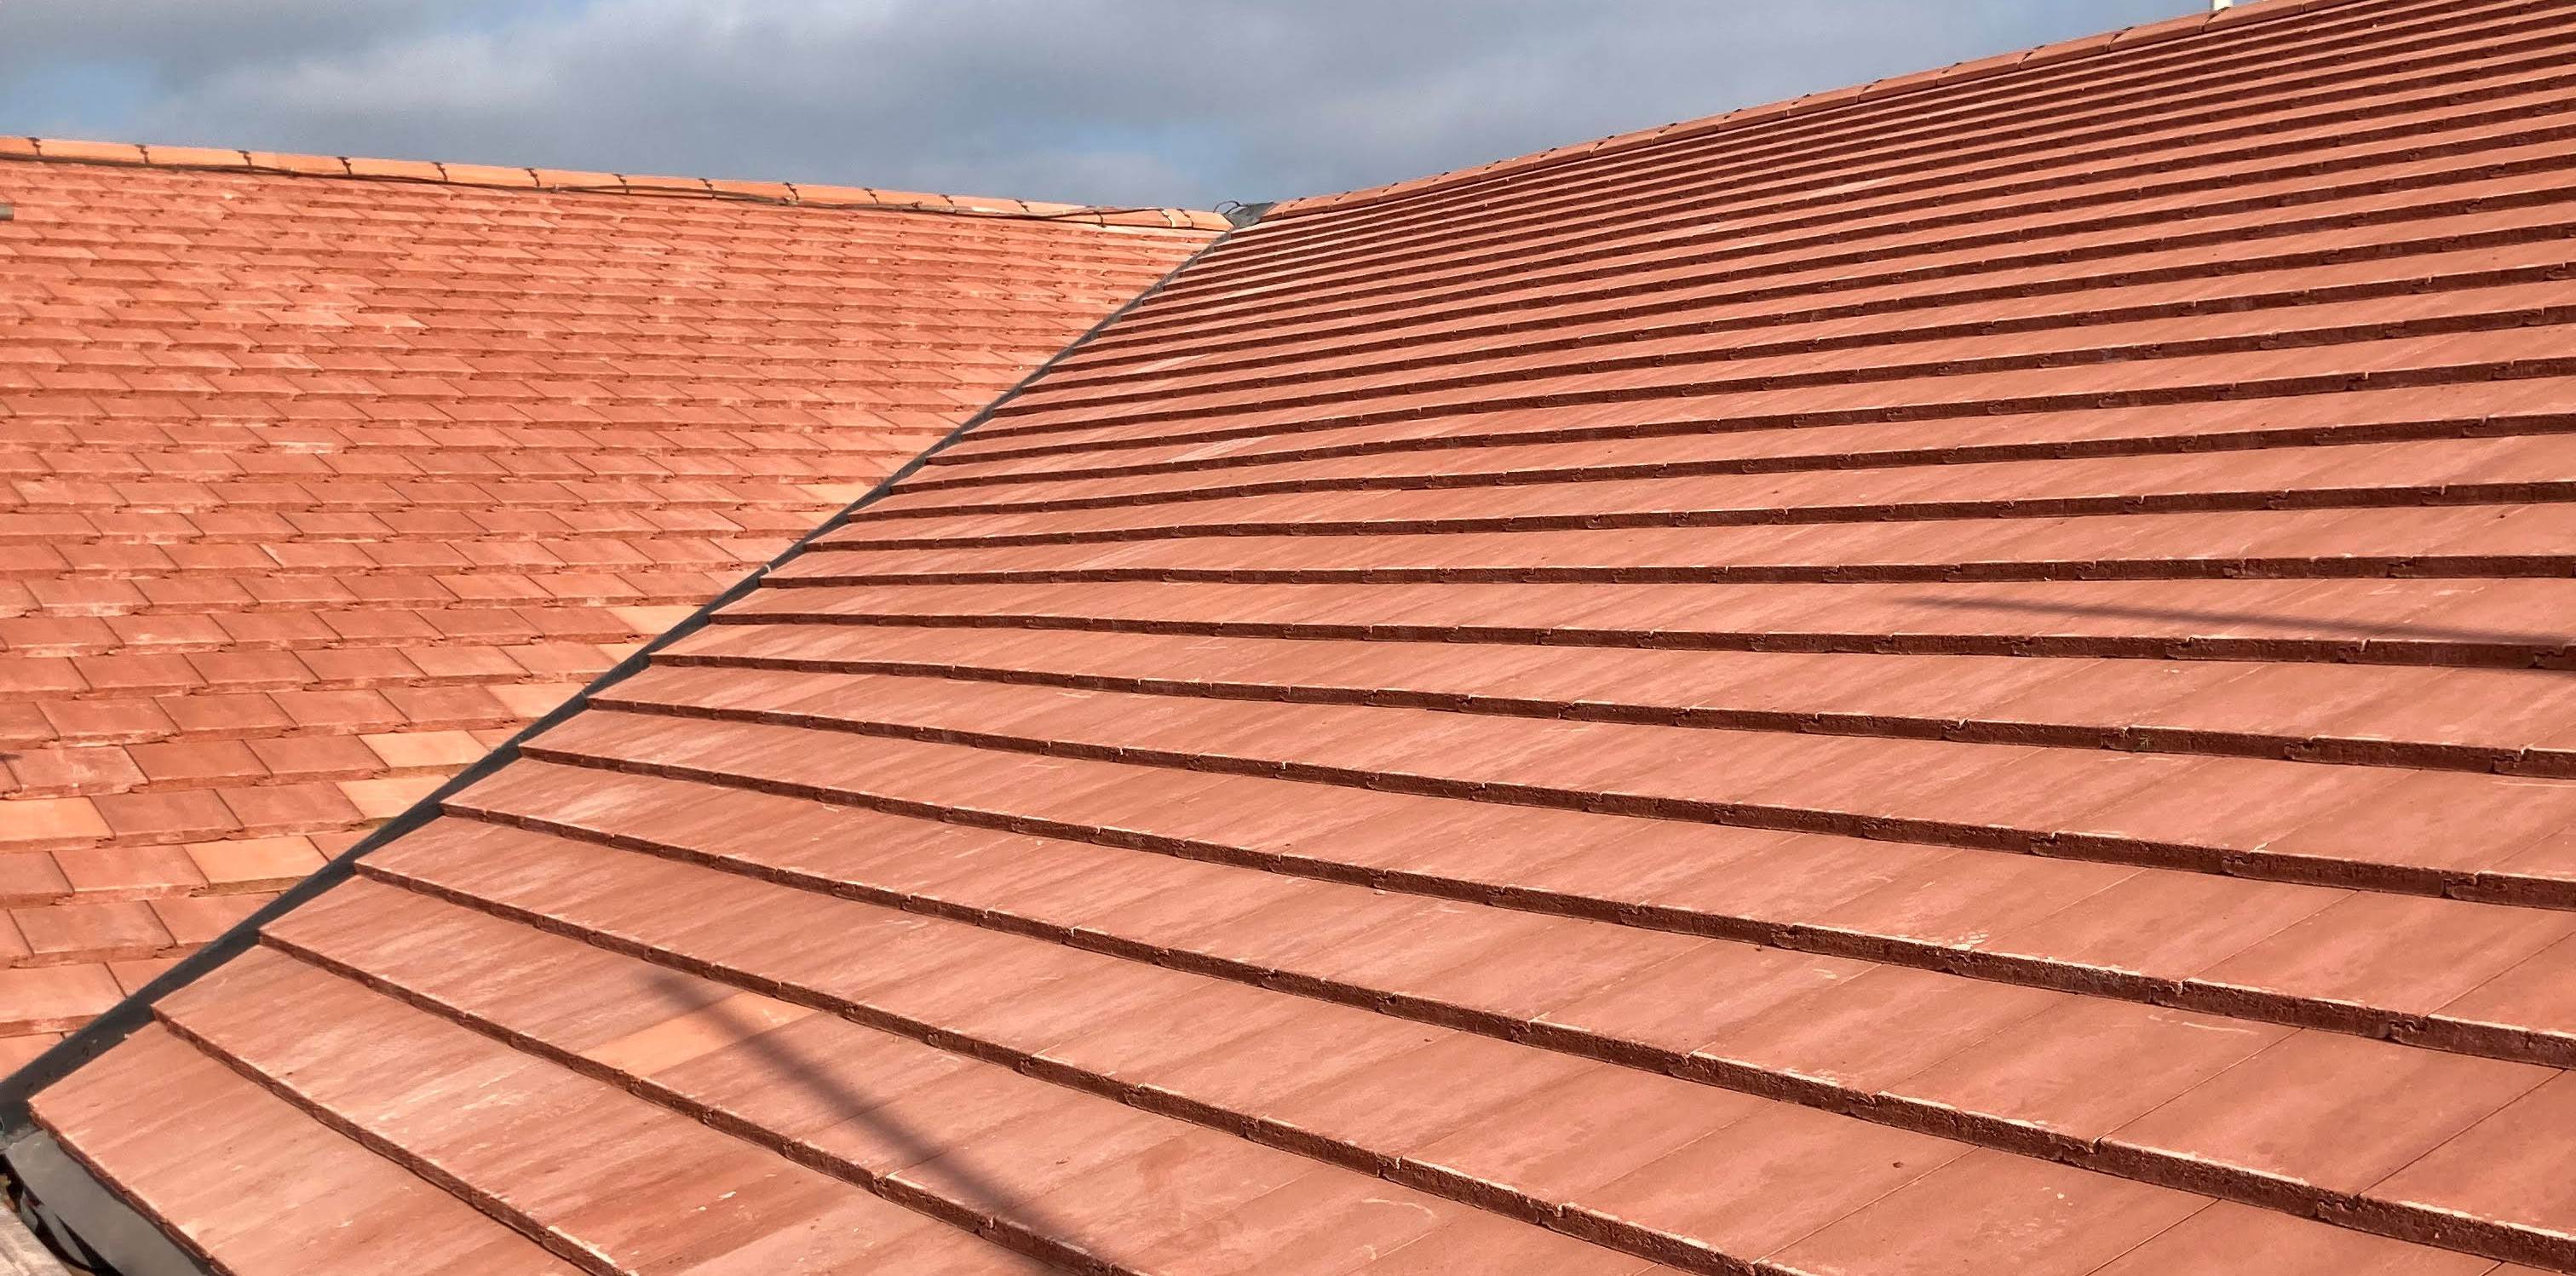 Re-roofing projects residential, commercial and industrial